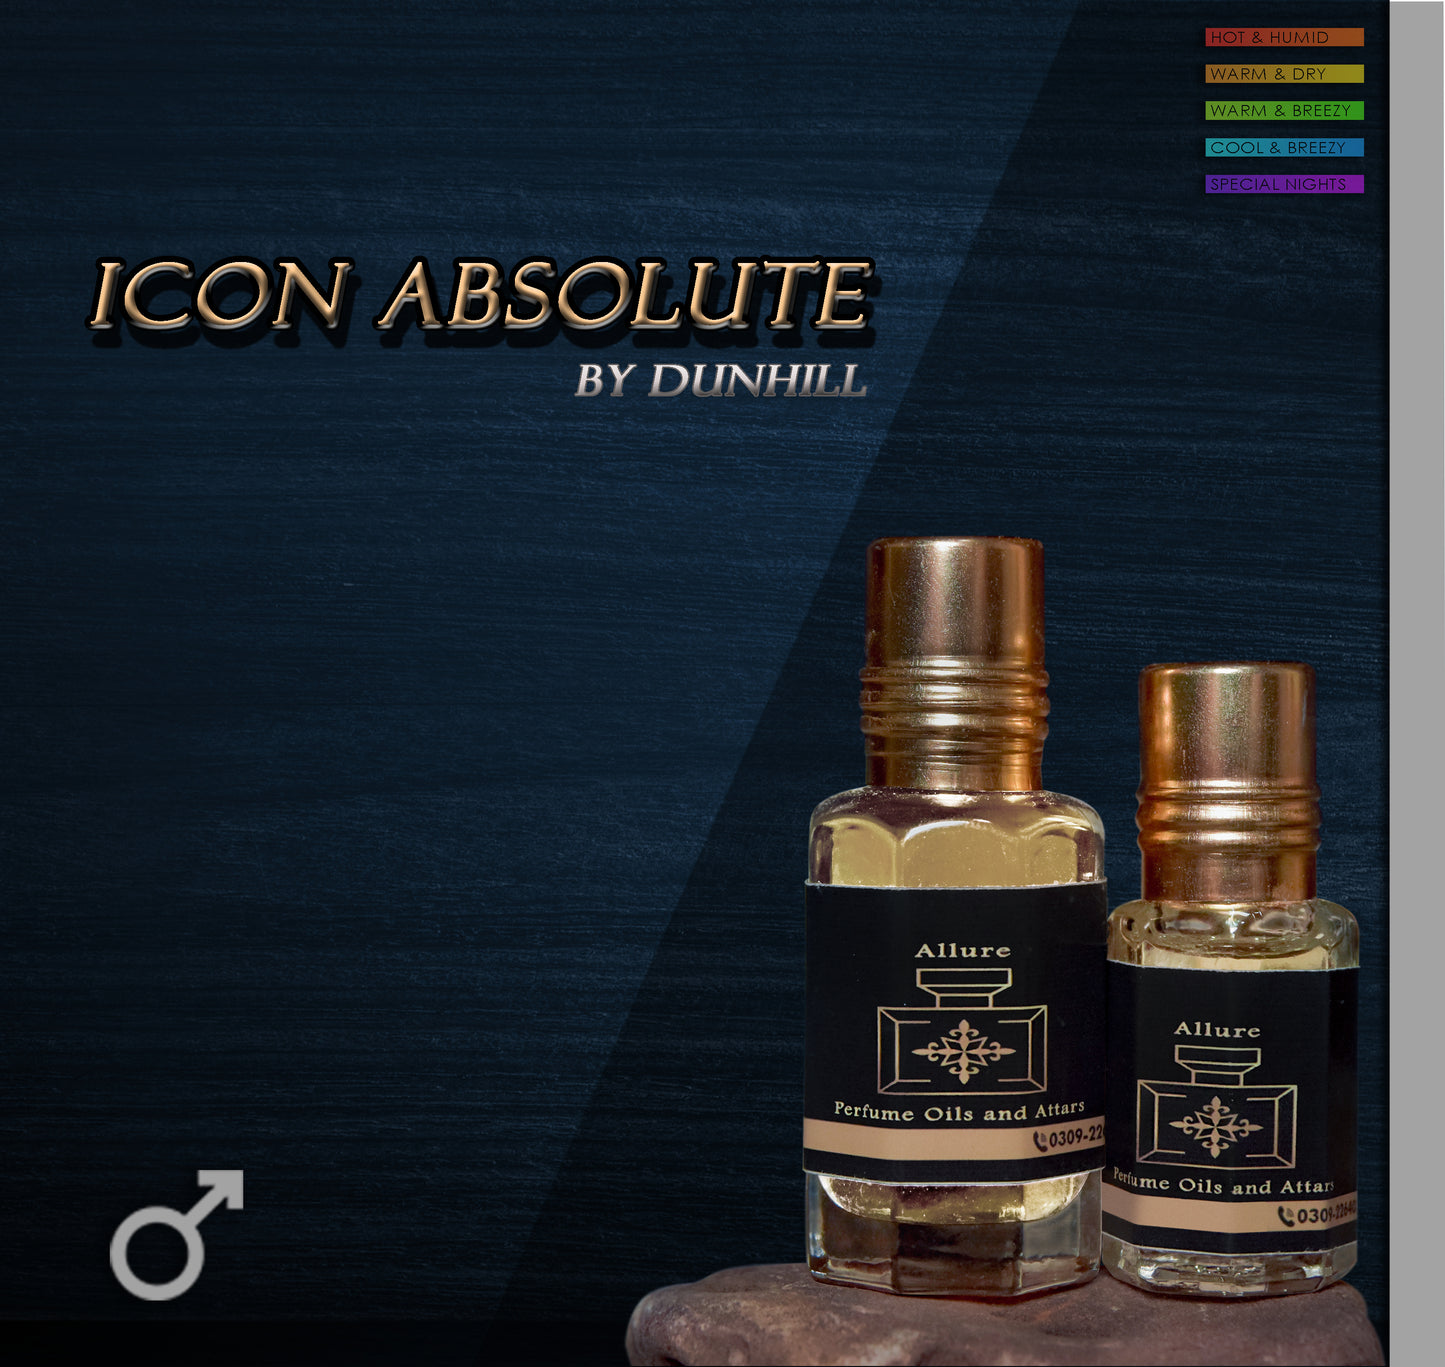 Icon Absolute by dunhill Attar in high quality (Perfume Oil)